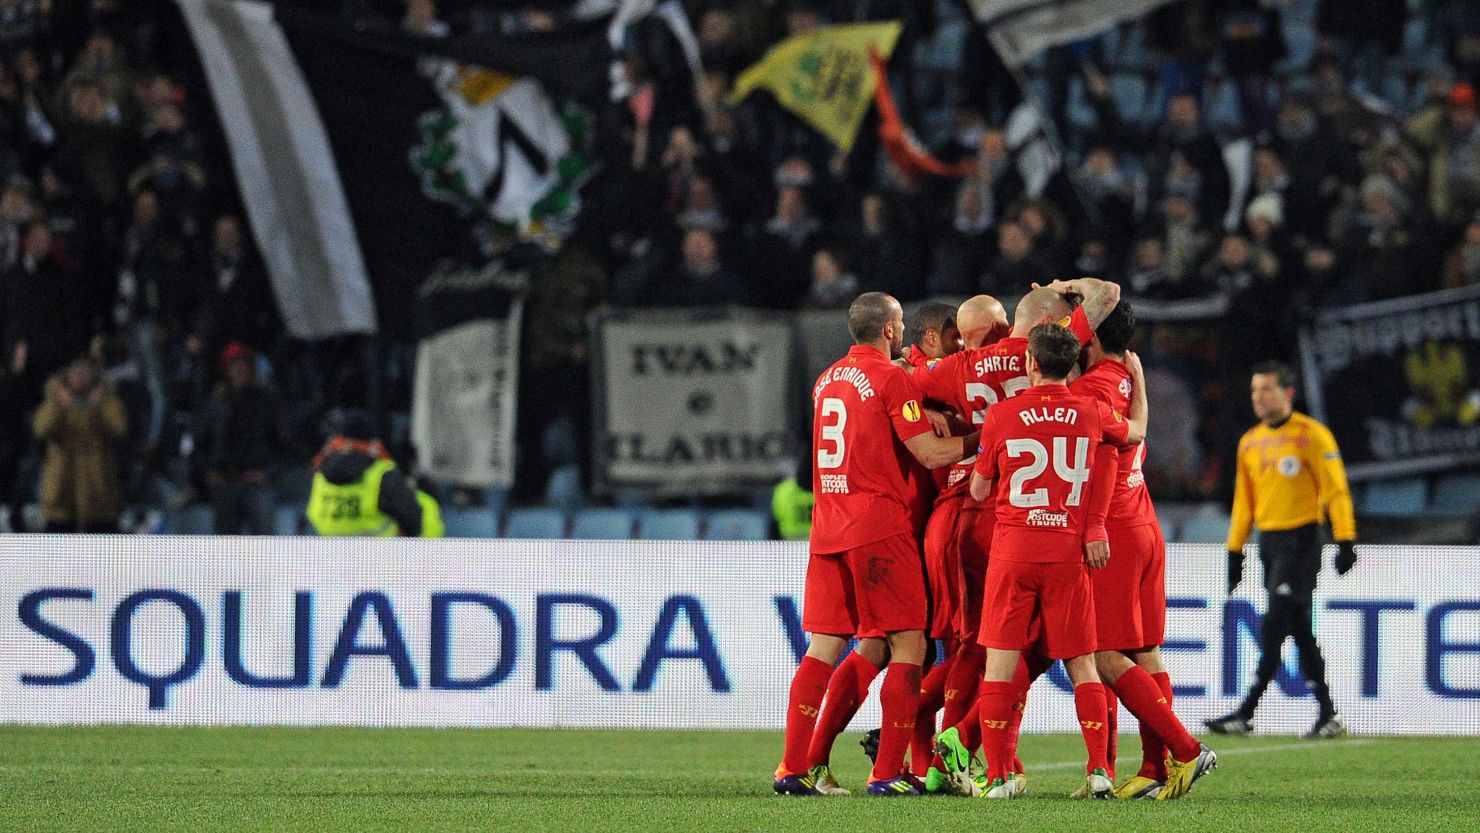 Liverpool's Jordan Henderson is mobbed after scoring the decisive goal in the 1-0 win over Udinese in Italy. 